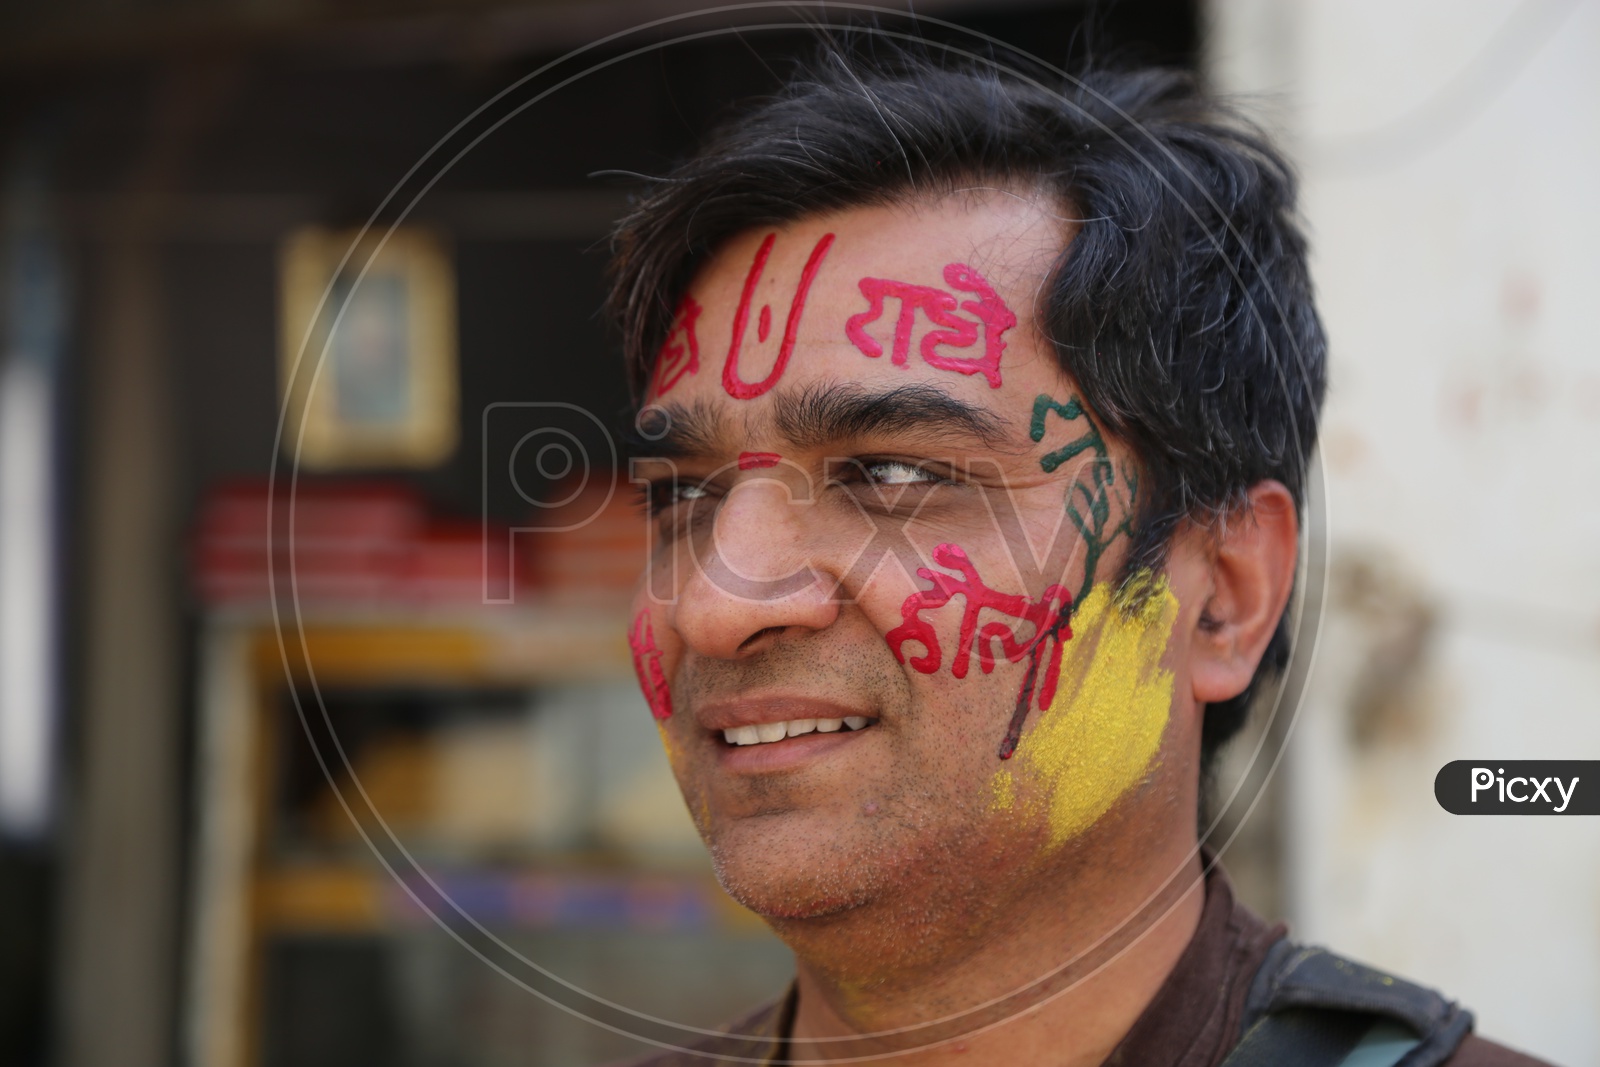 A Local Man In Nandagon With Paint On his Face